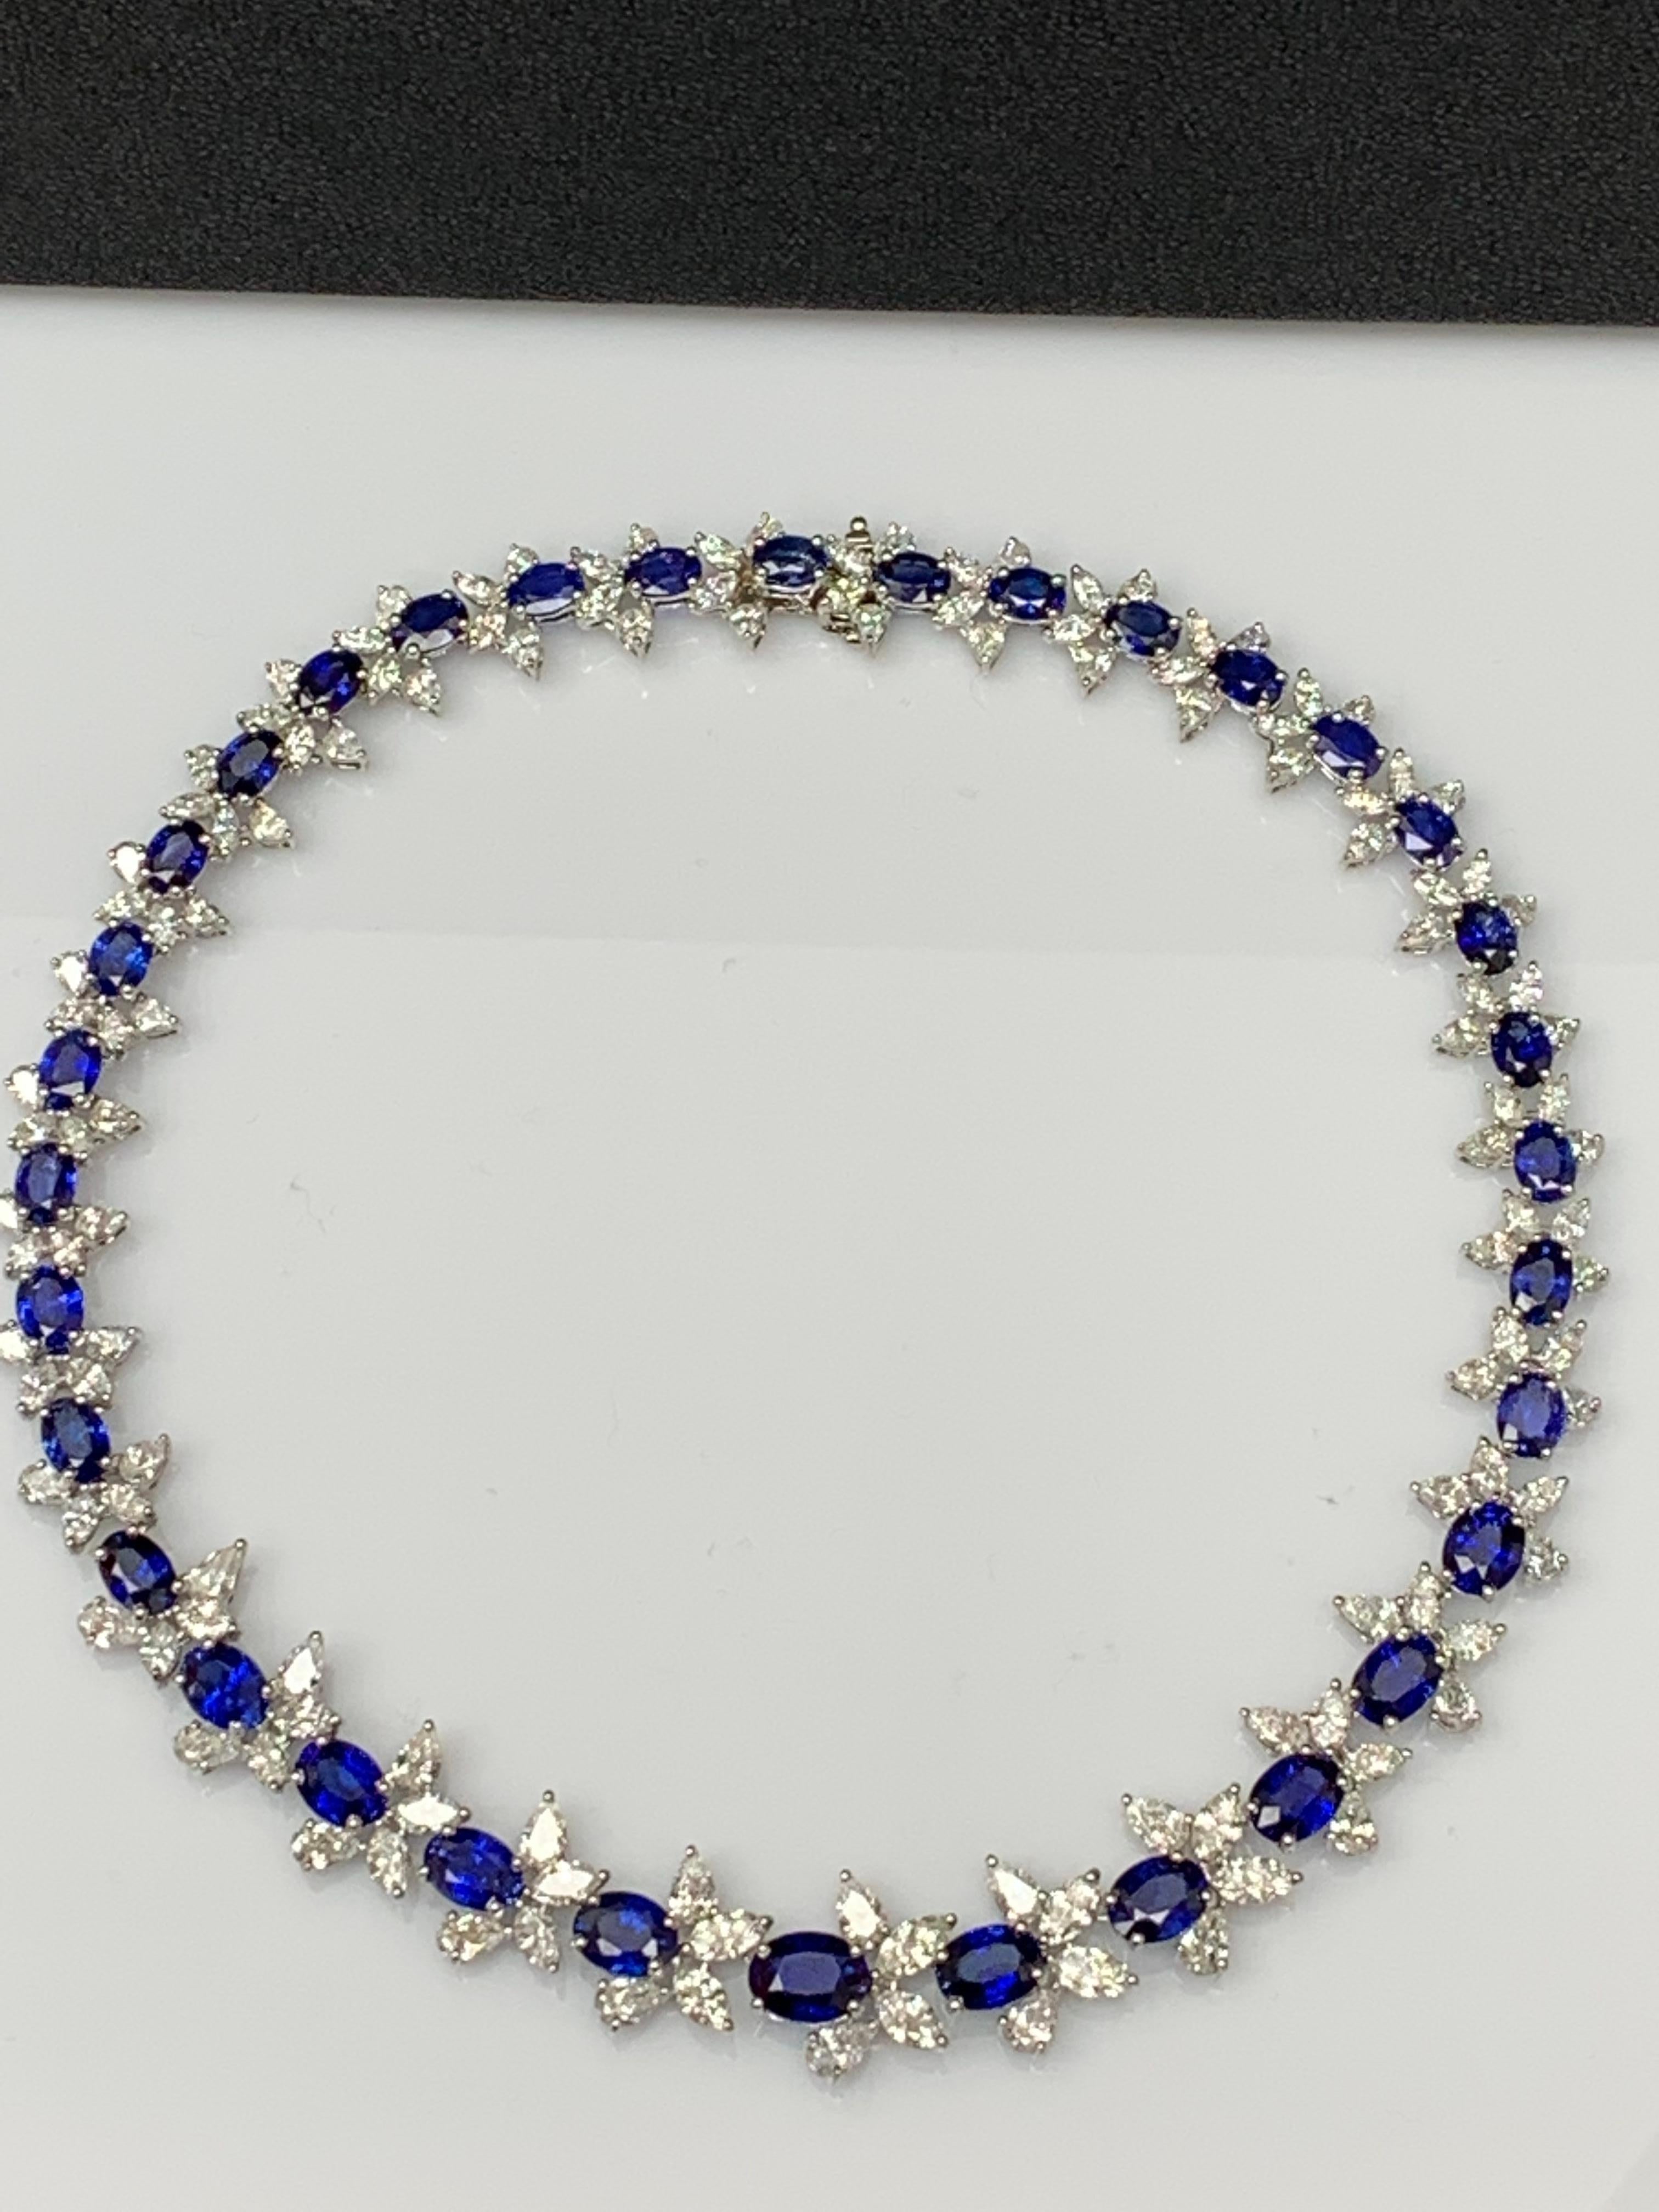 41.68 Carat Oval Cut Blue Sapphire and Diamond Necklace in Platinum For Sale 12